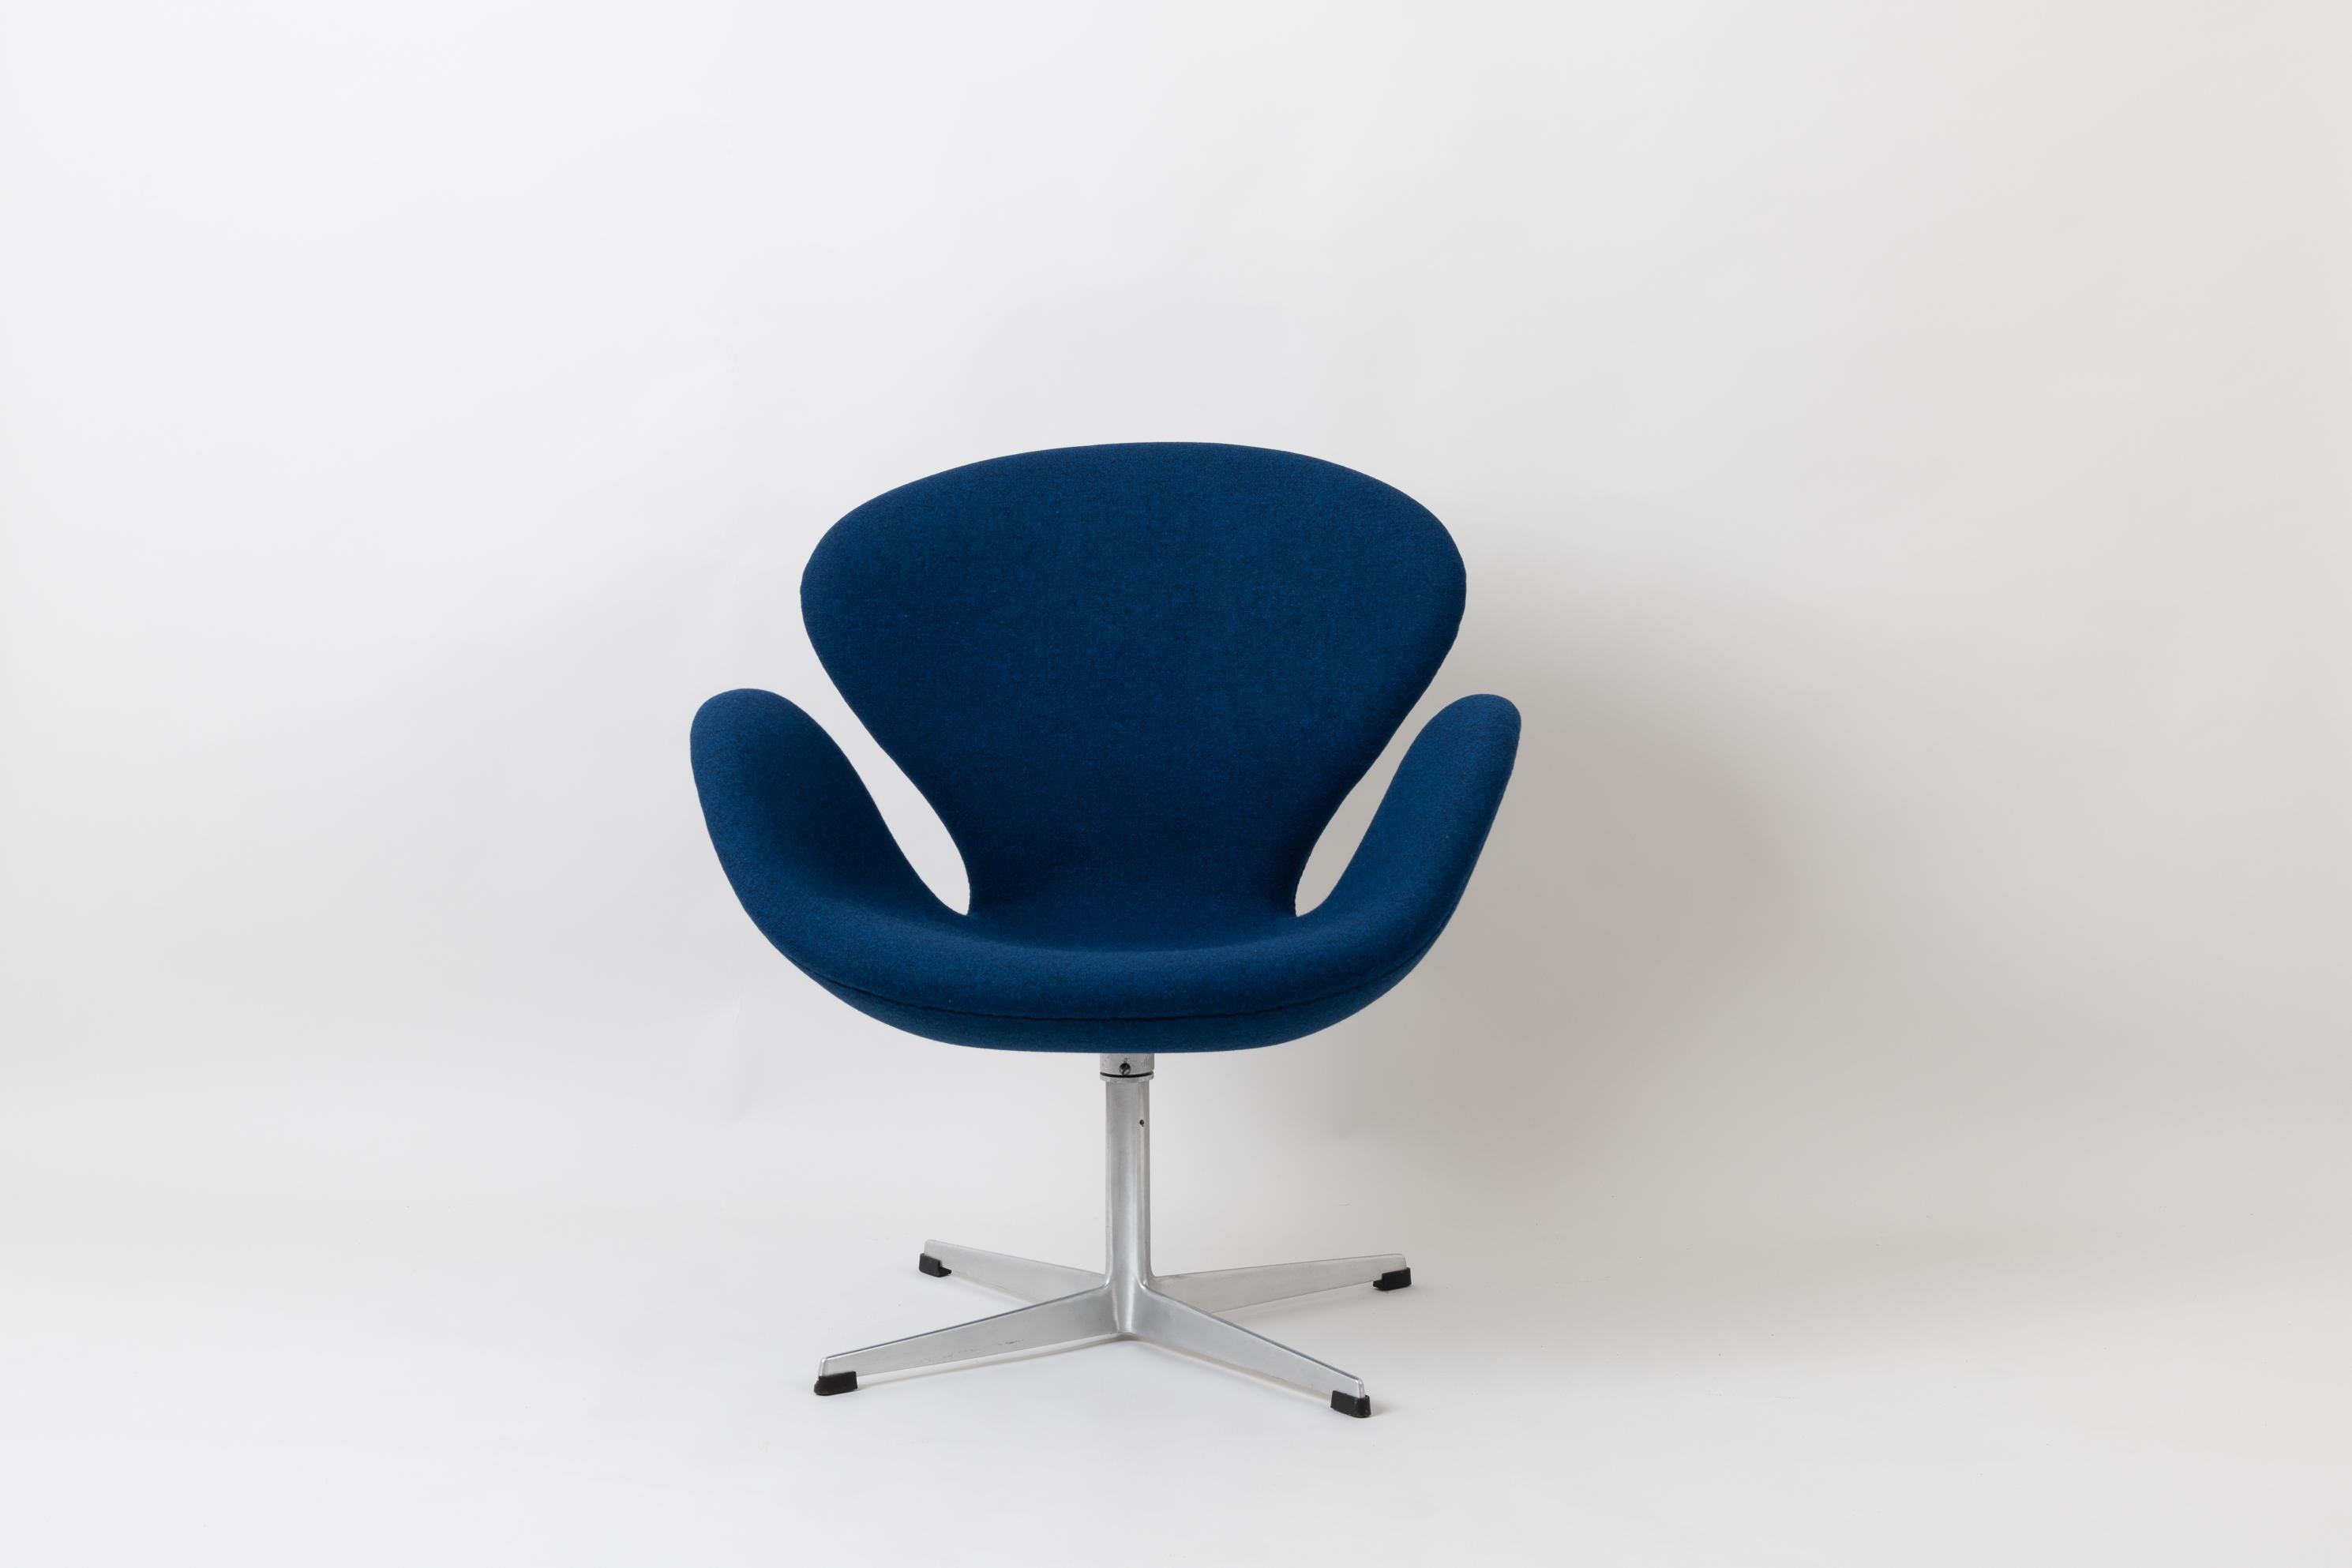 Armchair Svanen by Arne Jacobsen for Fritz Hansen in Denmark. Designed during the 1958 and later introduced on SAS Royal Hotel in Copenhagen the year 1960. SAS Royal Hotel was the world’s first designer hotel and a place where many Danish designers